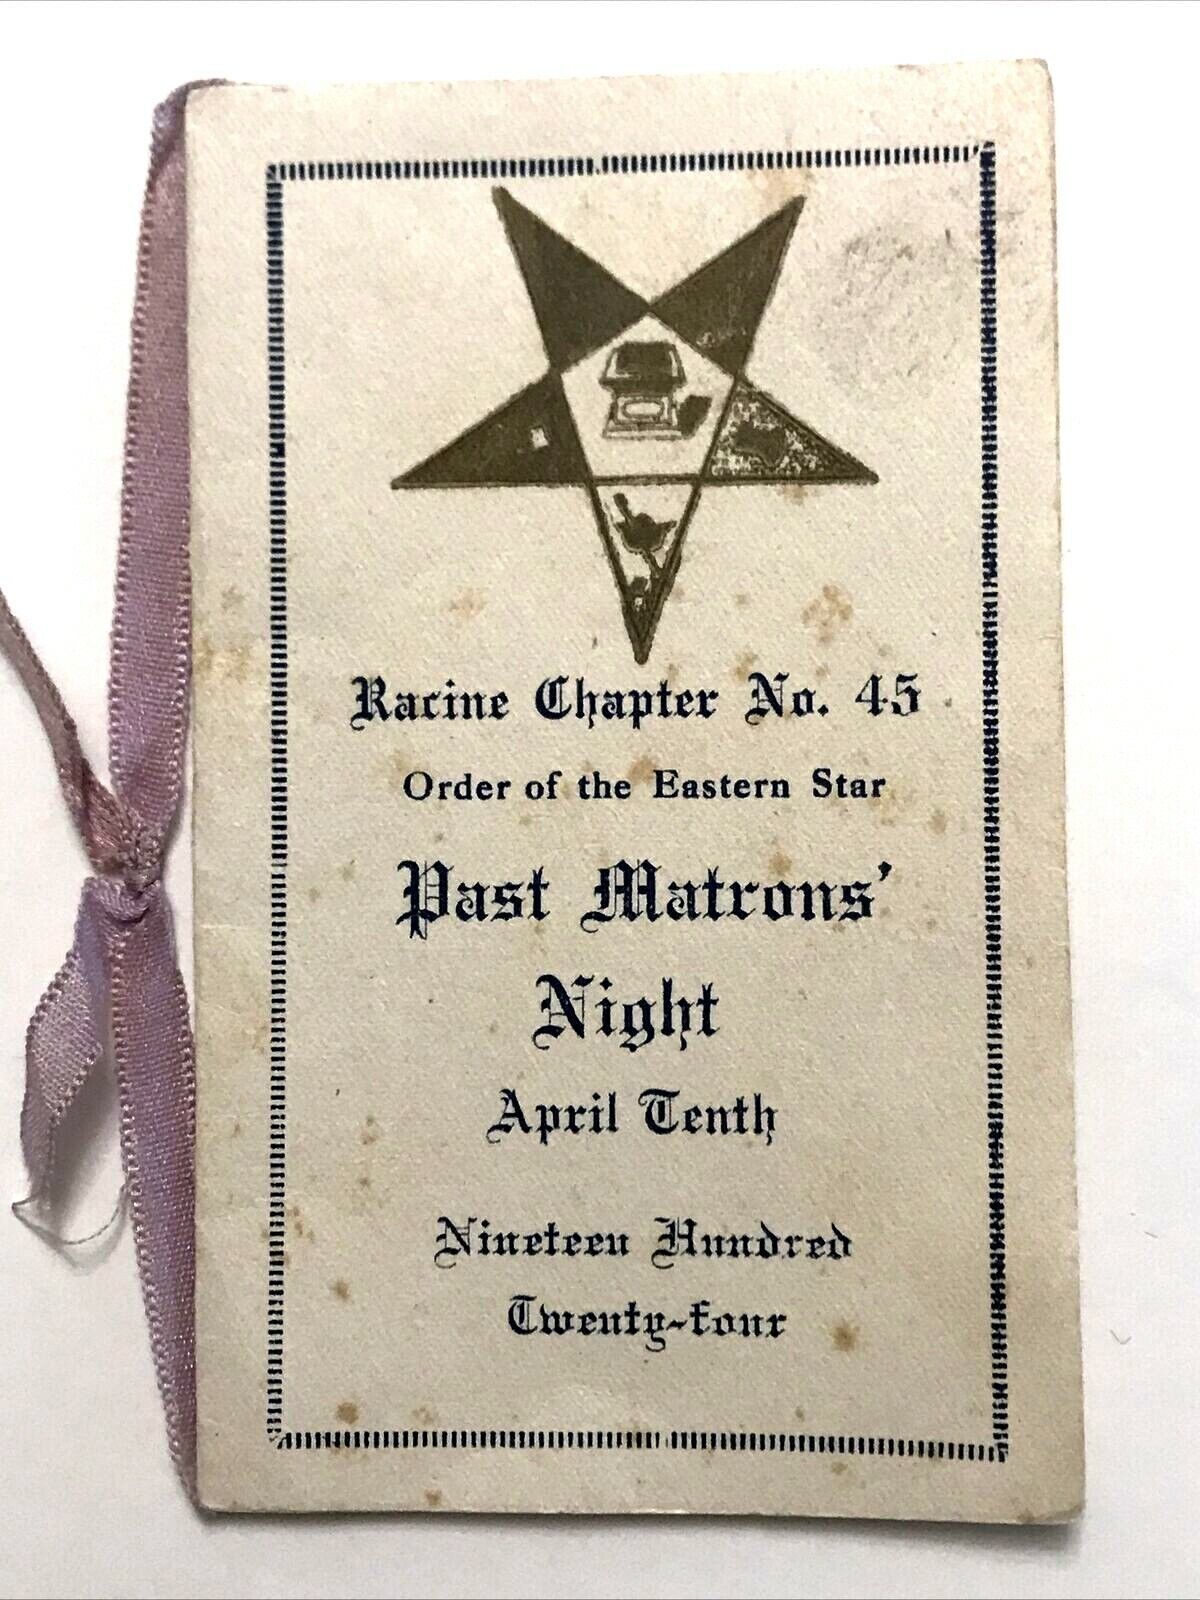 Primary image for 1924 Order of the Eastern Star Racine Chapter No 45 Matron's Night Menu Program